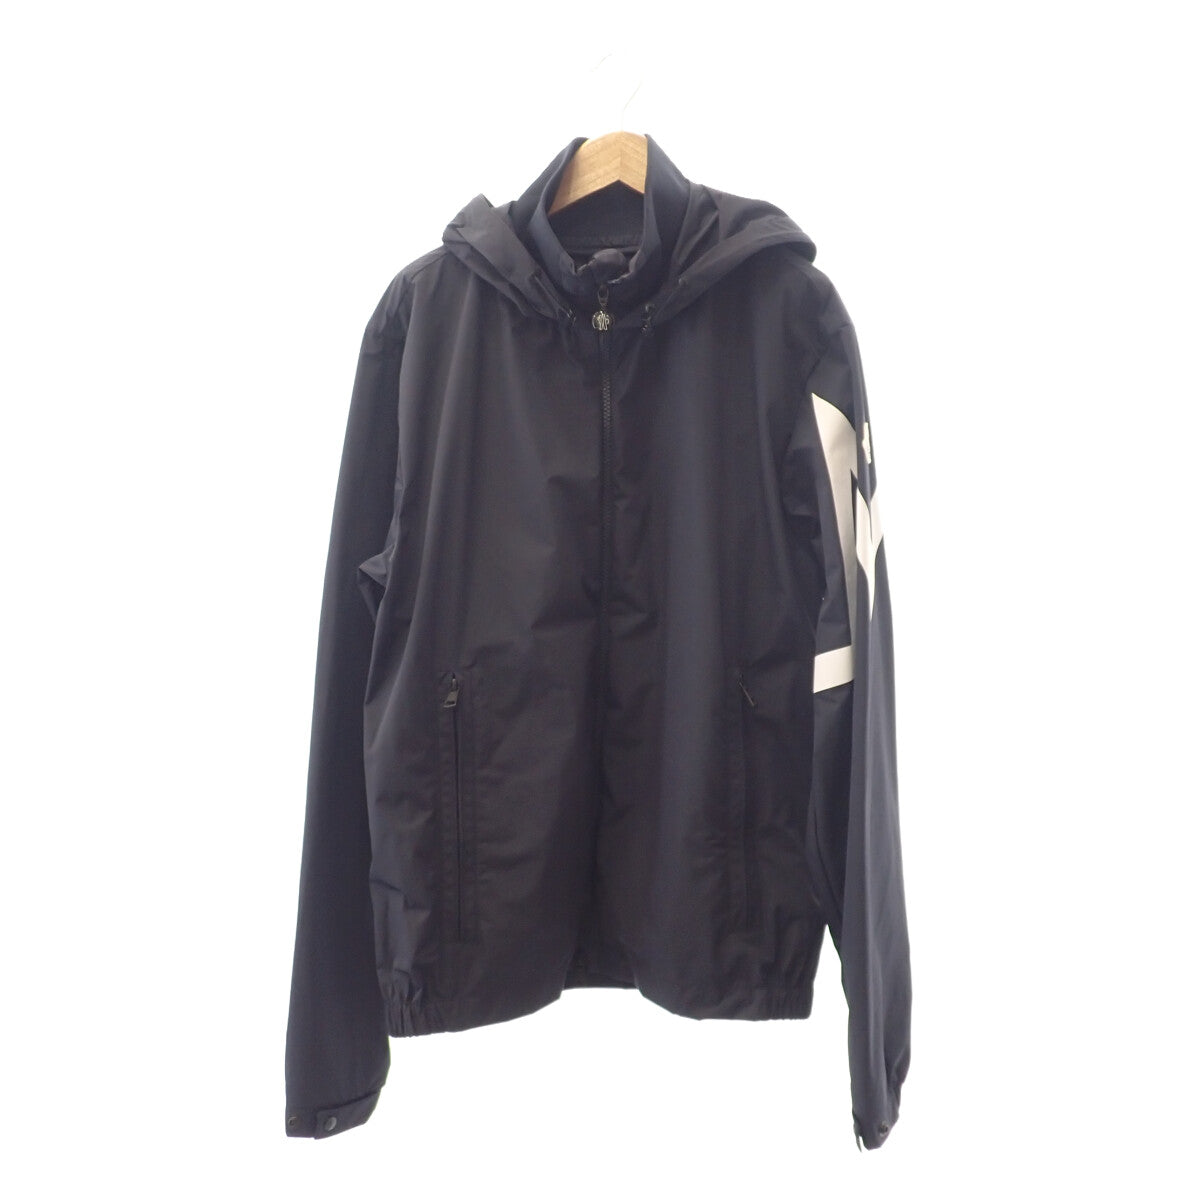 MONCLER モンクレール 22AW FETUQUE フード付き ジップアップパーカーポリエステル グリーン H20911A00152 54A91